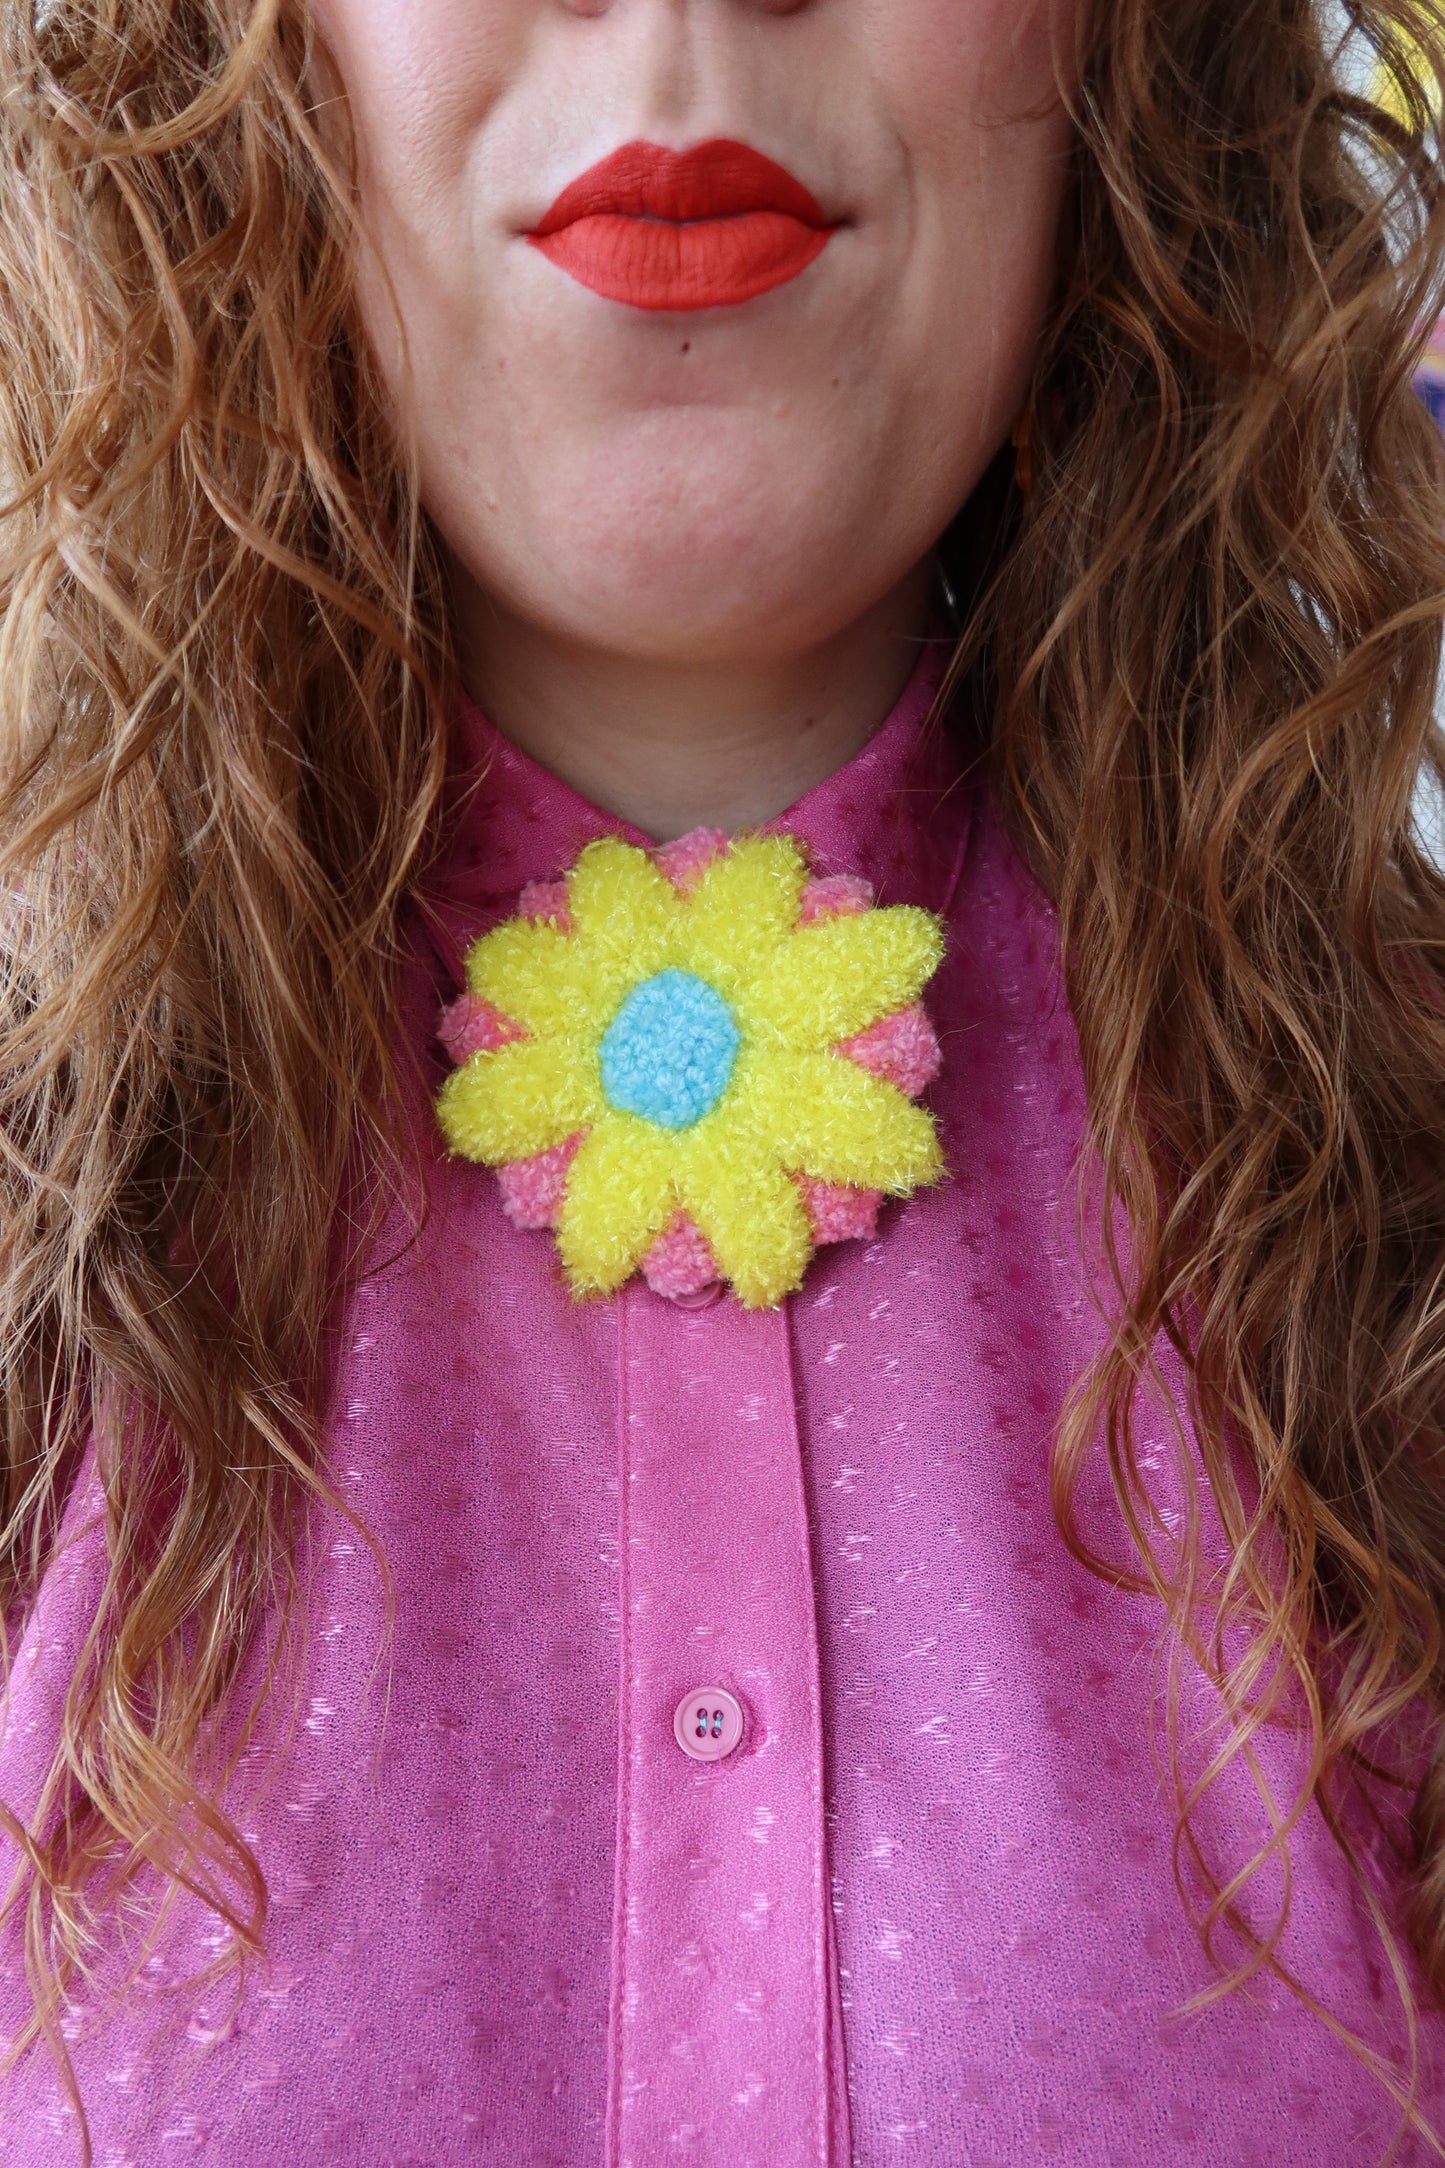 Flower Accessorie blue/yellow/pink